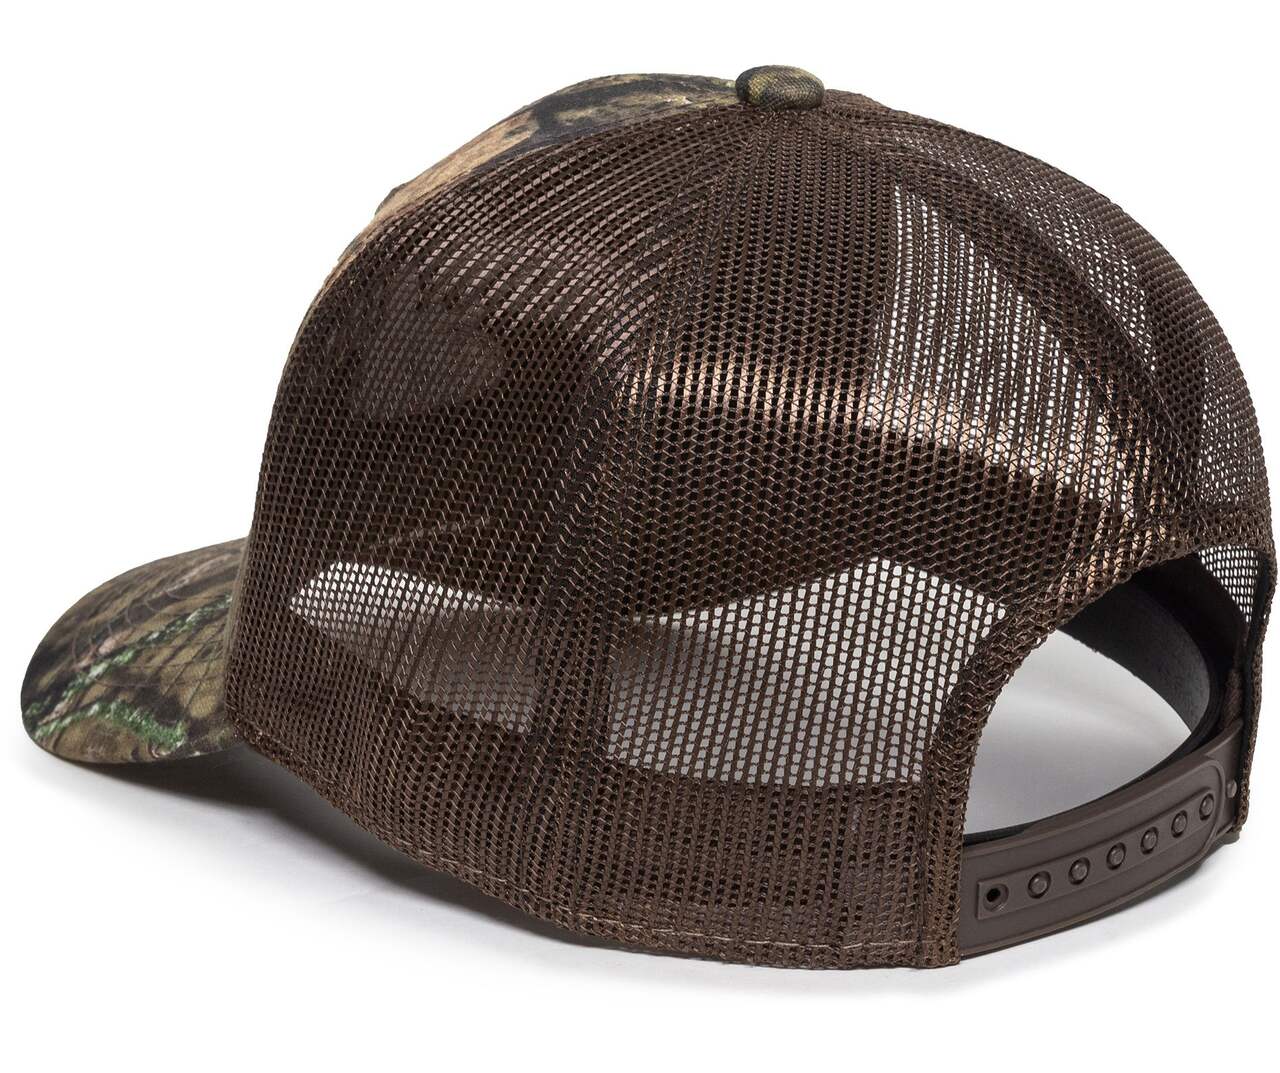 Mossy Oak Country Mesh Back Hat, Brown